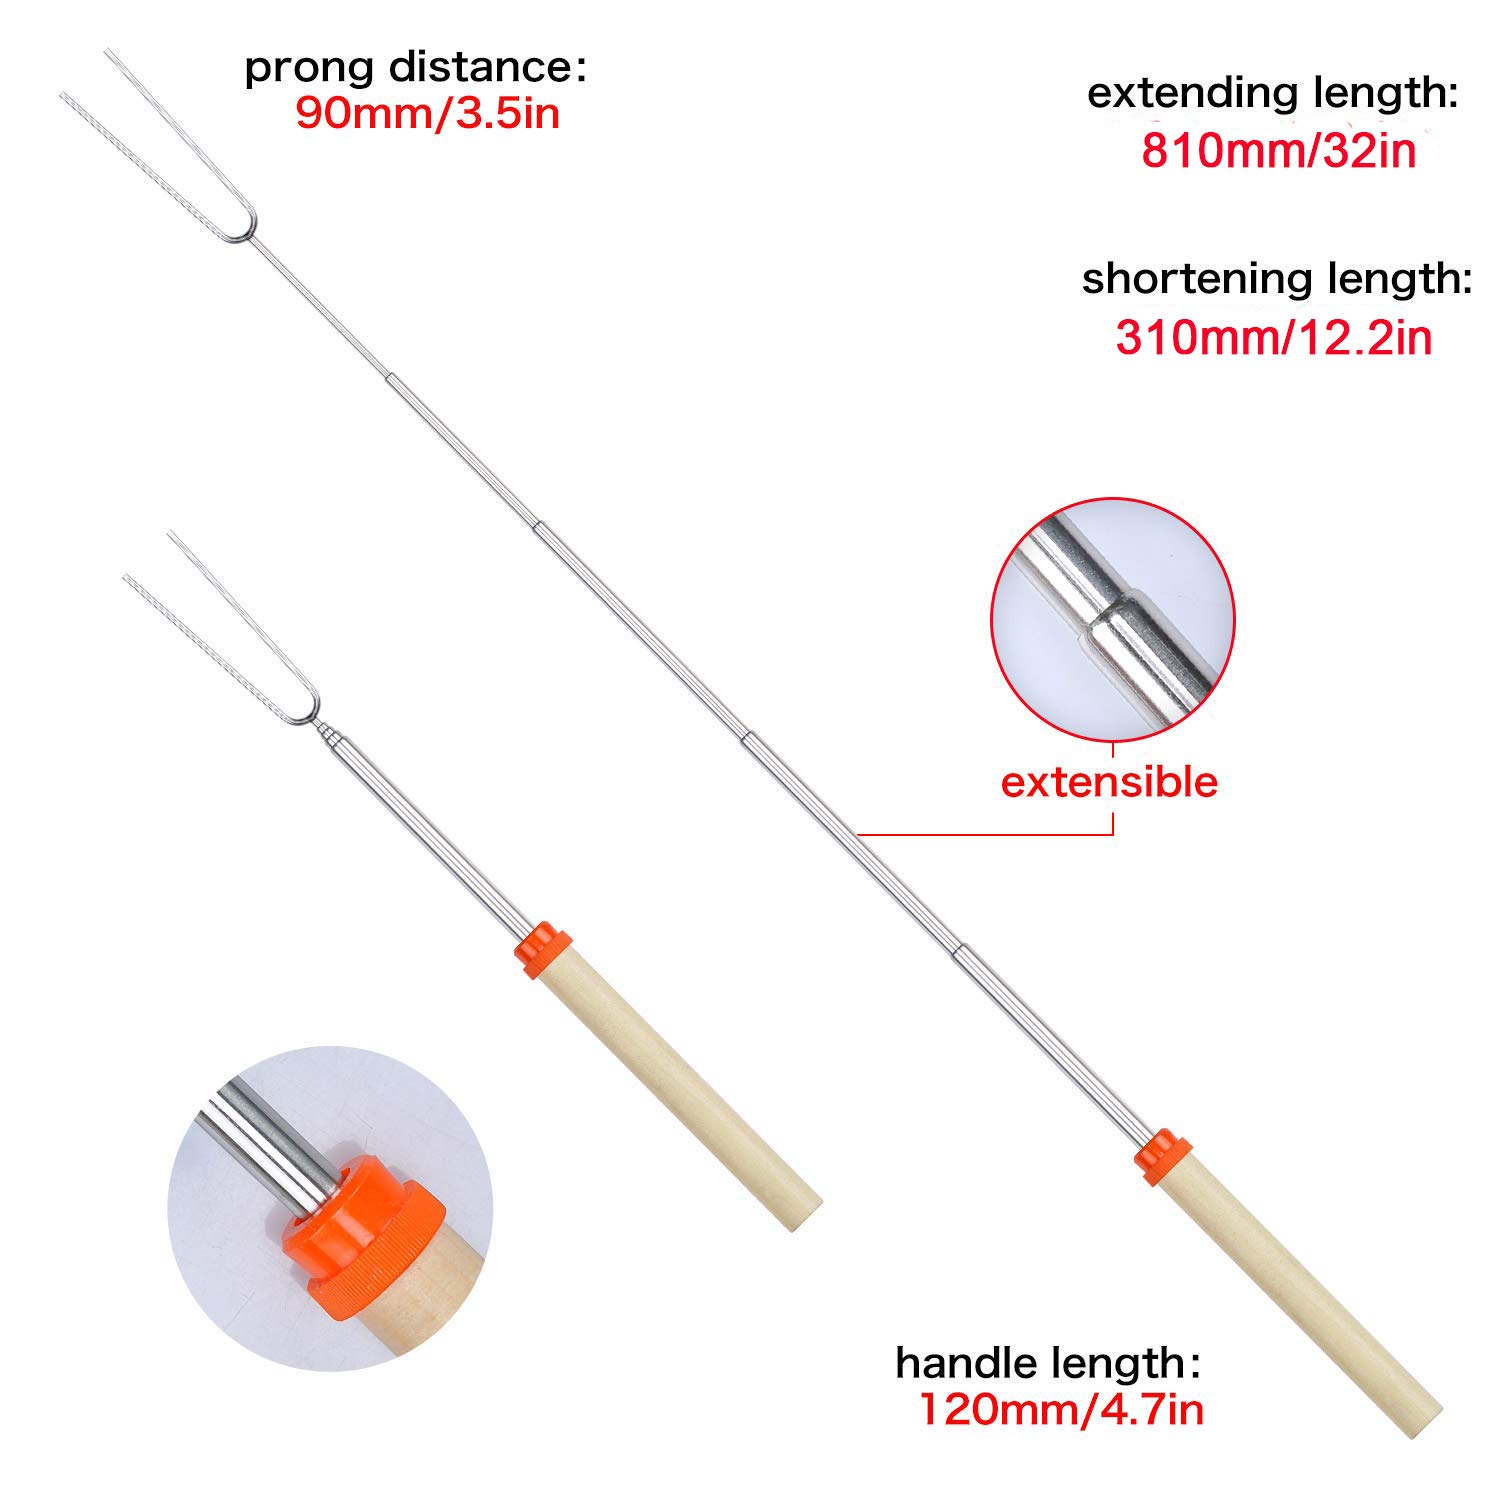 Marshmallow Roasting Sticks Set of 8 Telescoping Smores Skewers Stainless Steel BBQ Barbecue Forks & Hot Dog Fork 32 Inch Extendable Patio Fire Pit, Camping, Campfire, Bonfire, Cookware Kit - image 2 of 9